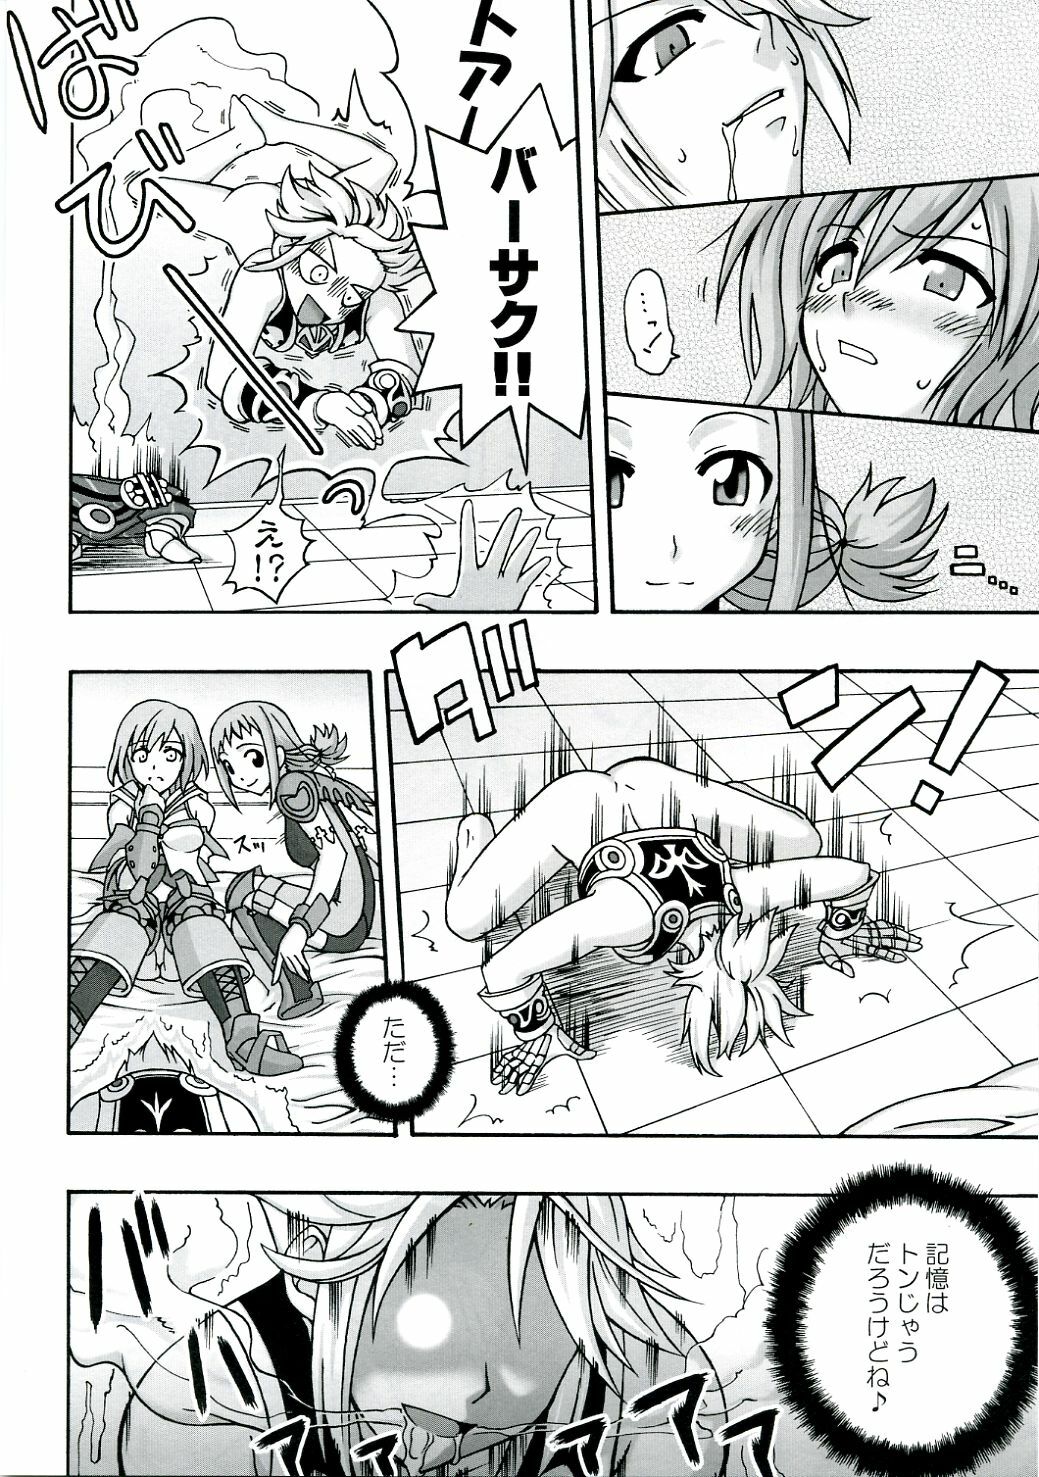 (C70) [FruitsJam (Mikagami Sou)] In The Room (Final Fantasy XII) page 17 full